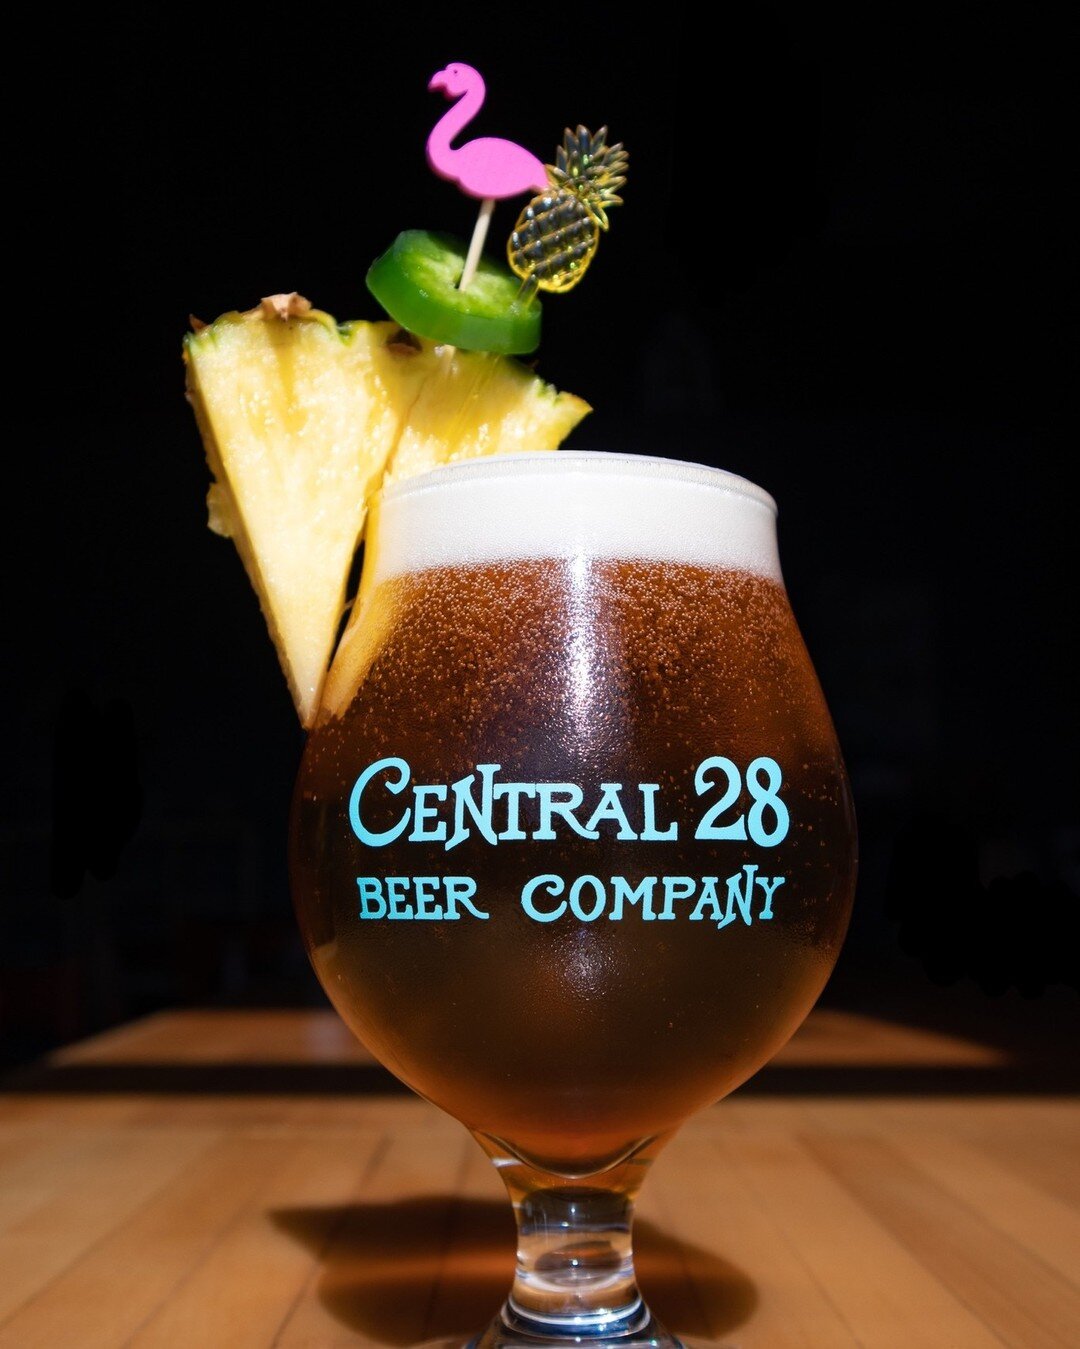 Summer's not over yet, so why not say &quot;Hello&quot; to this drink ?

Hot and Refreshing at the same time, 'Hello Summer' is a Pineapple Jalape&ntilde;o Sour brought to you by Central 28 Beer Co. 

Garnished with Fresh Pineapple, this drink is swe